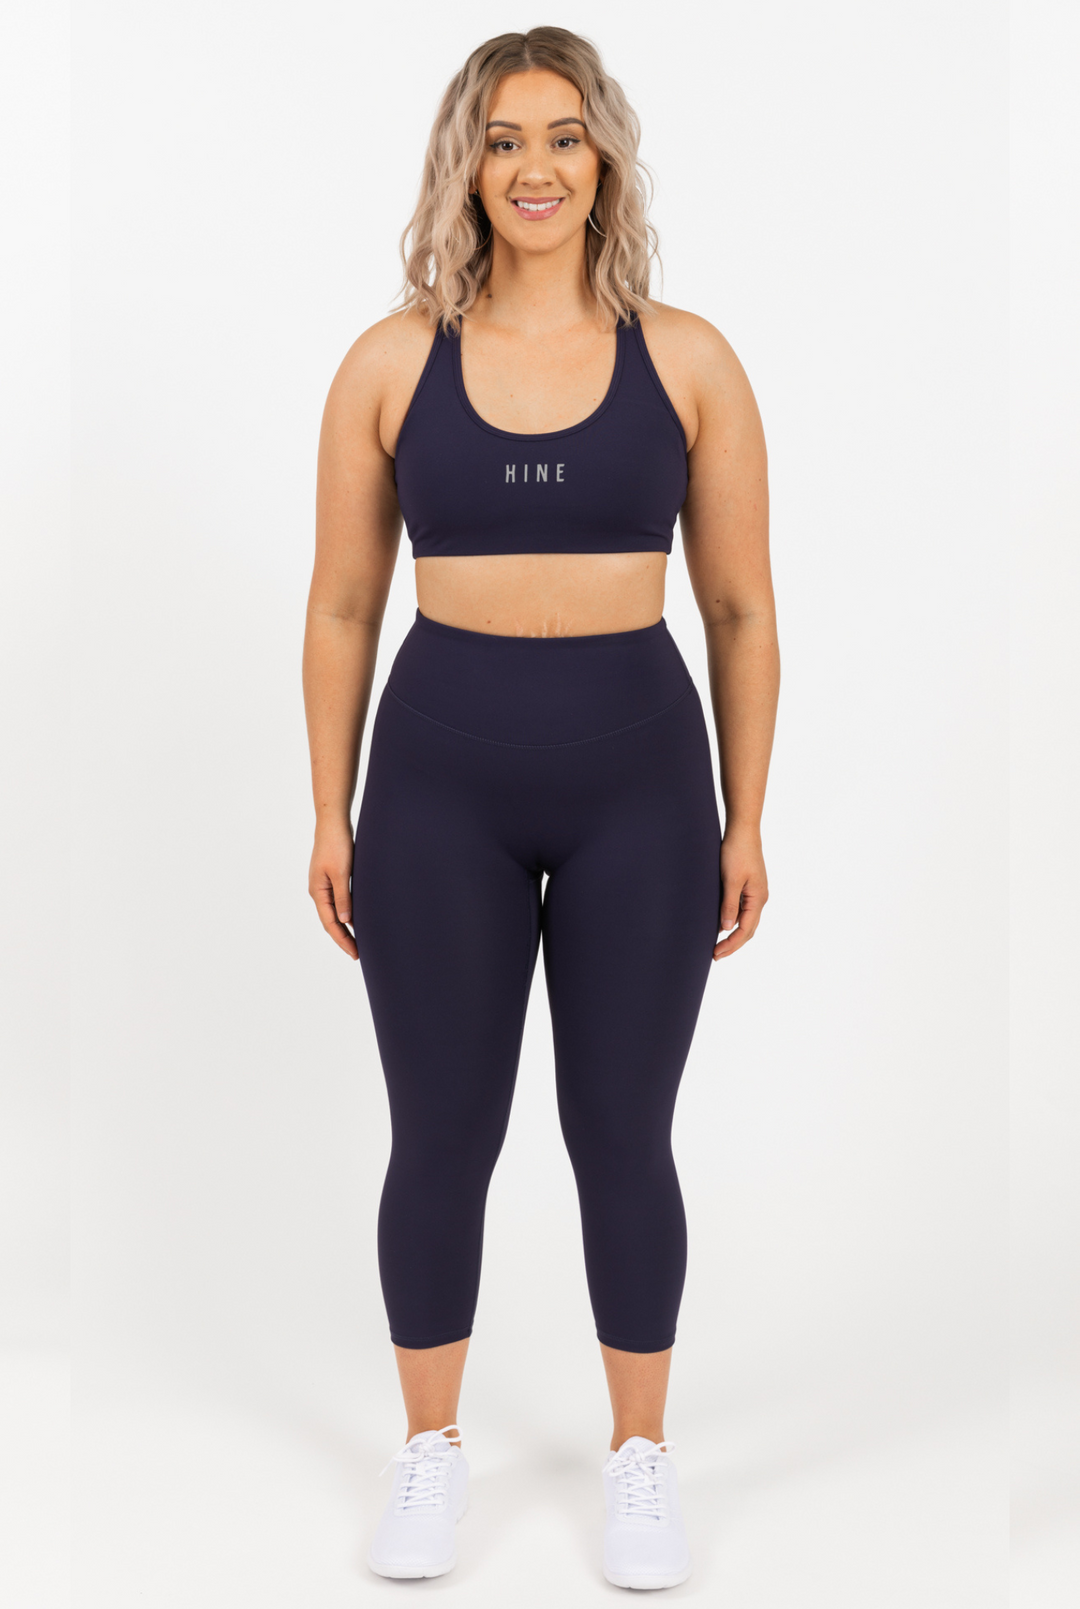 RECOVERY FULL LENGTH LEGGINGS ONYX – HINE COLLECTION